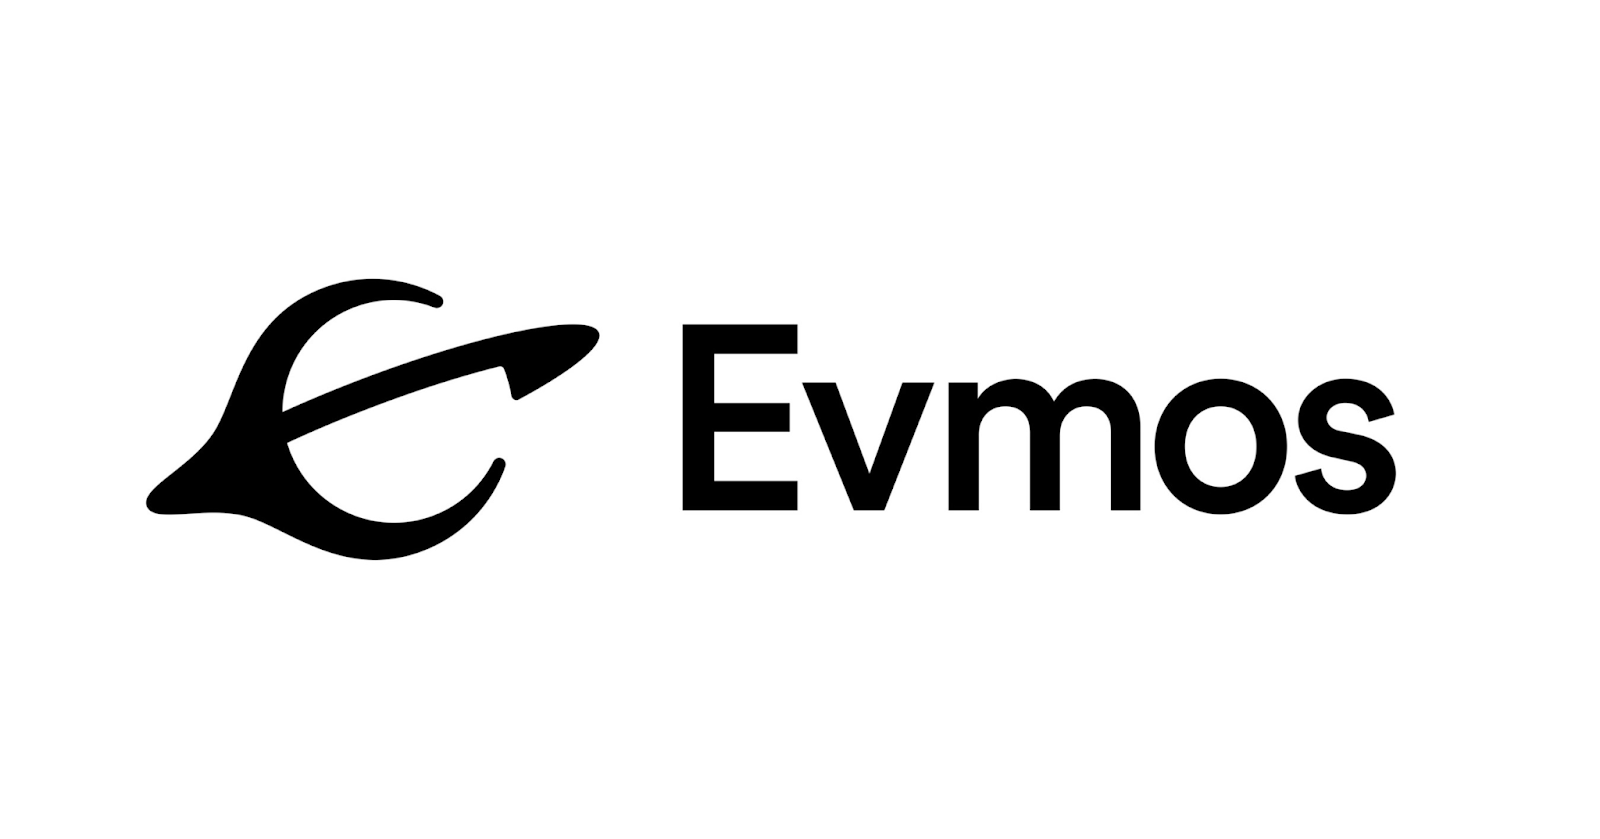 What is Evmos?